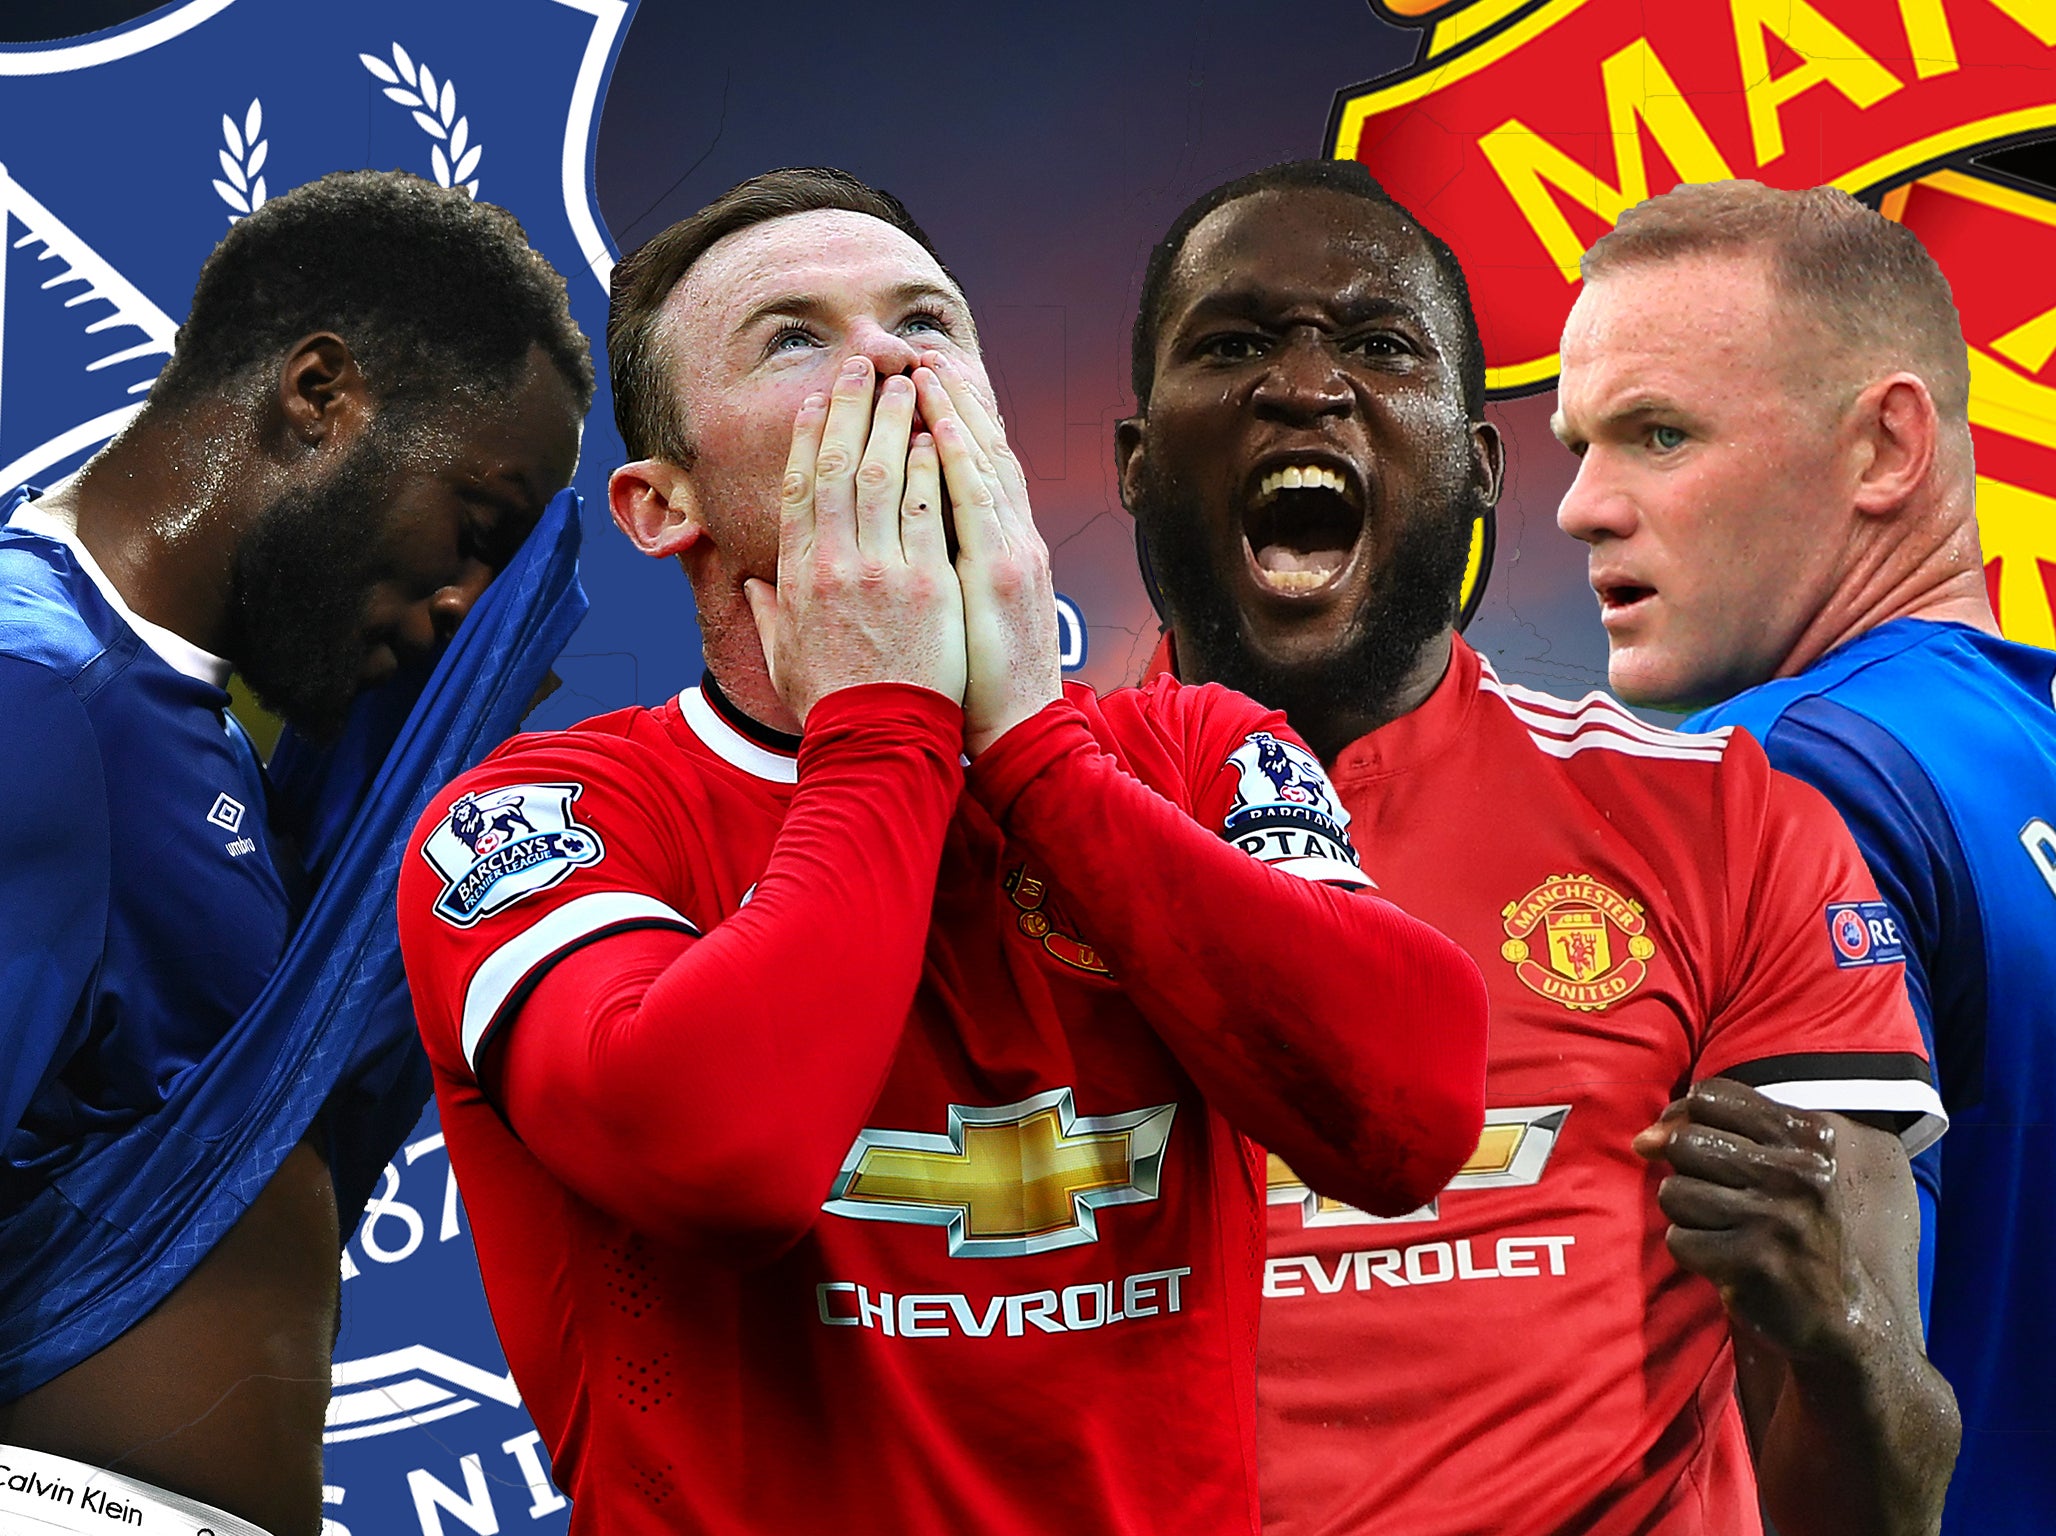 Lukaku and Rooney have experienced differing fortunes this season